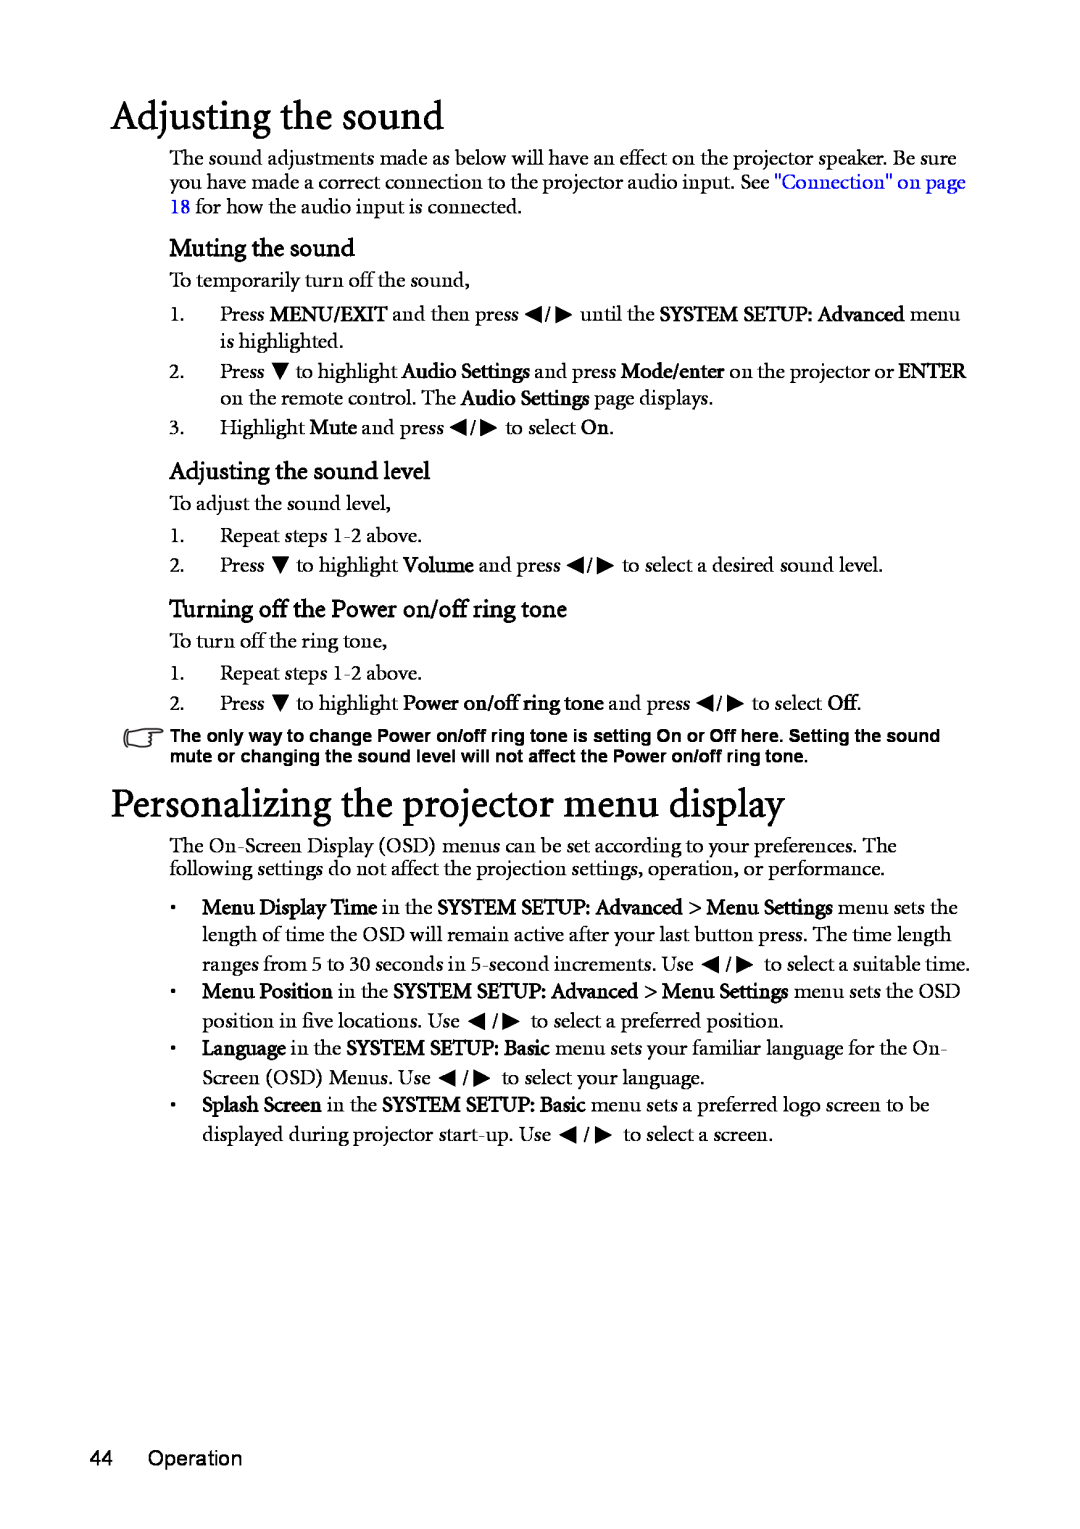 BenQ MP723 user manual Personalizing the projector menu display, Muting the sound, Adjusting the sound level 